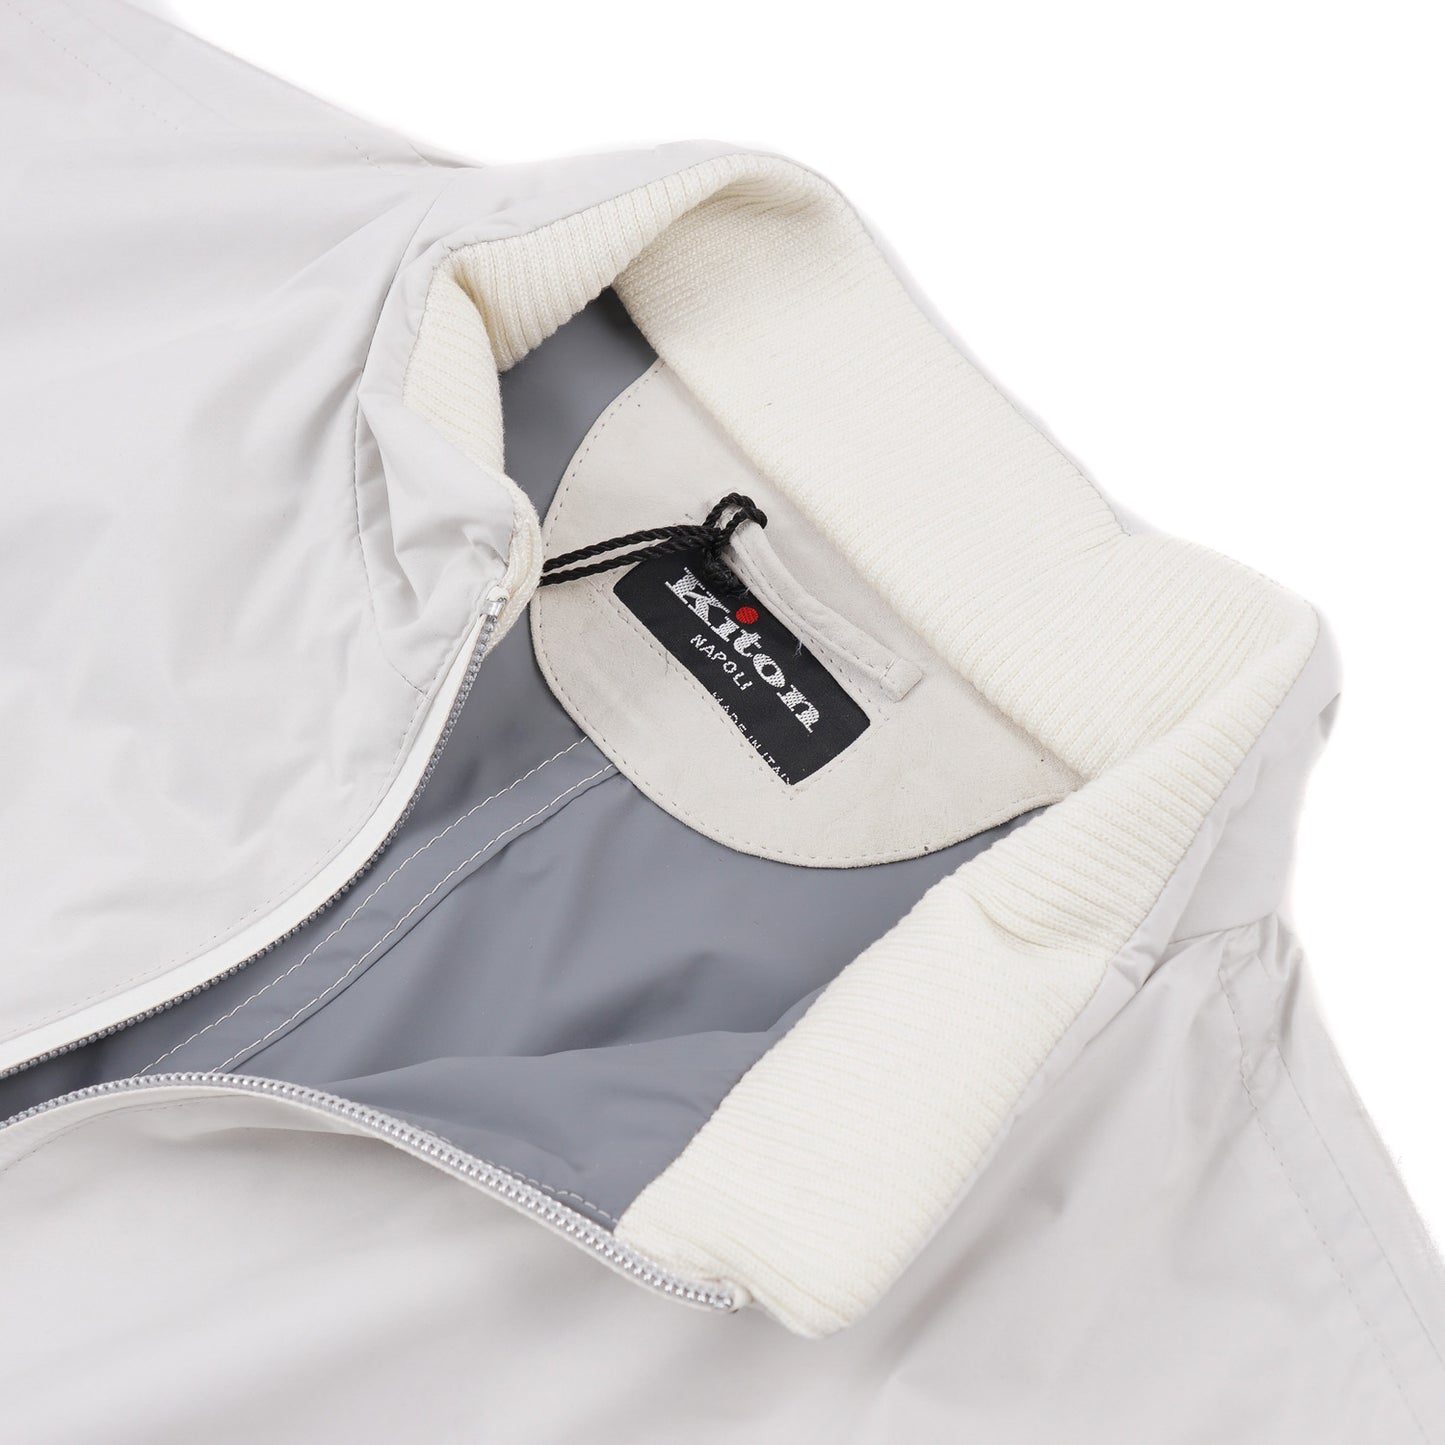 Kiton Packable Water-Repellent Bomber Jacket - Top Shelf Apparel